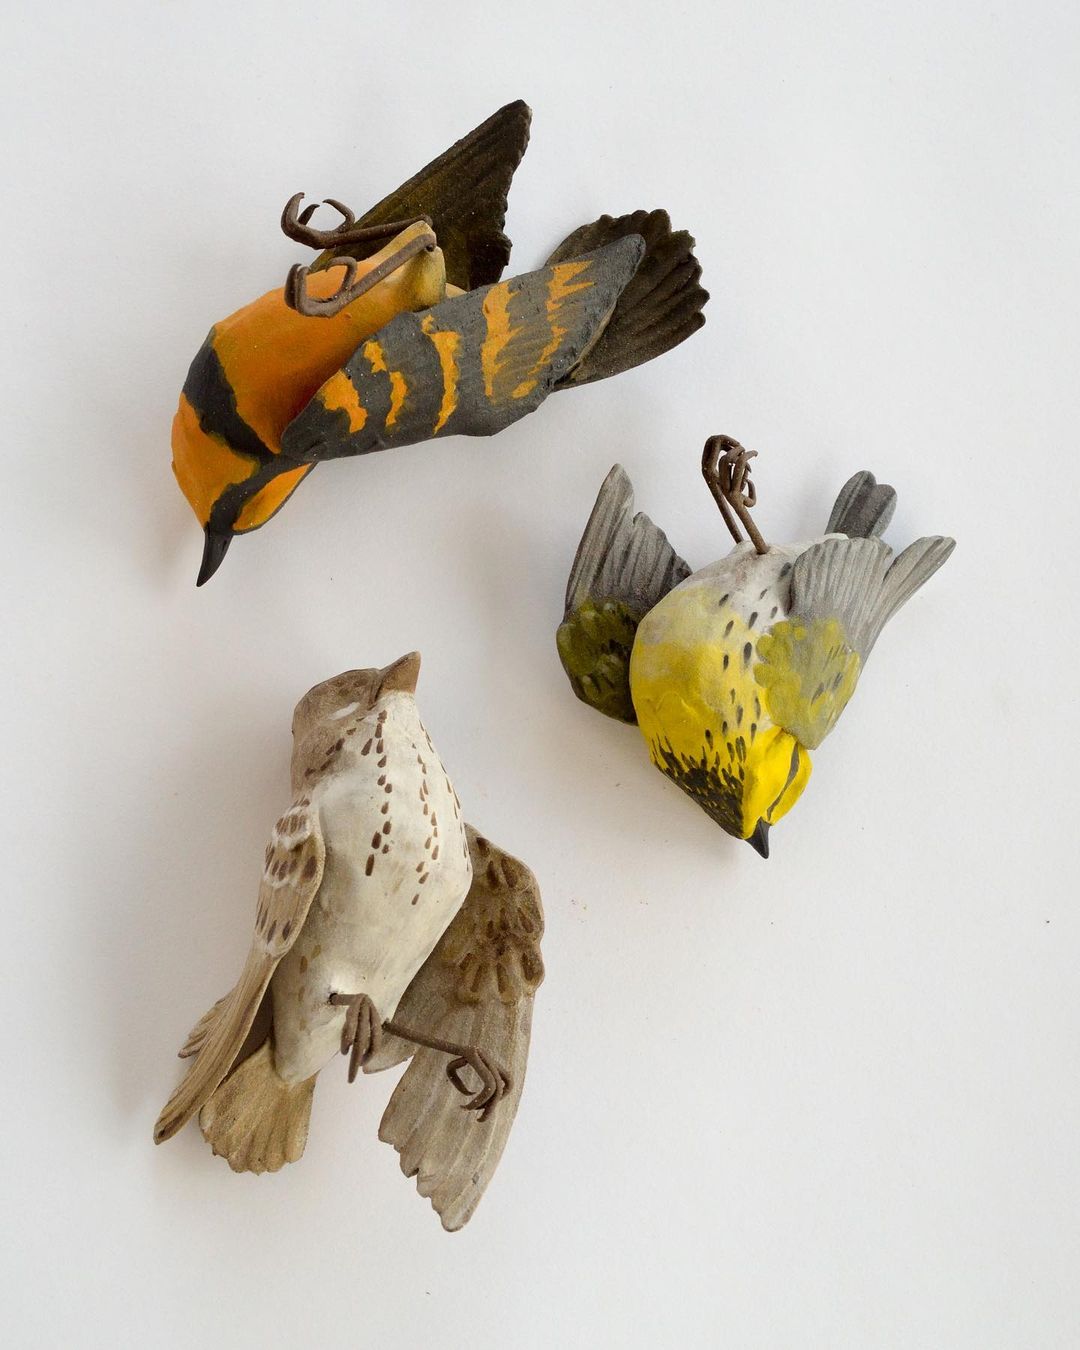 Ceramic Vases Ornate With Realistic Bird Sculptures By Sarah Conti (1)